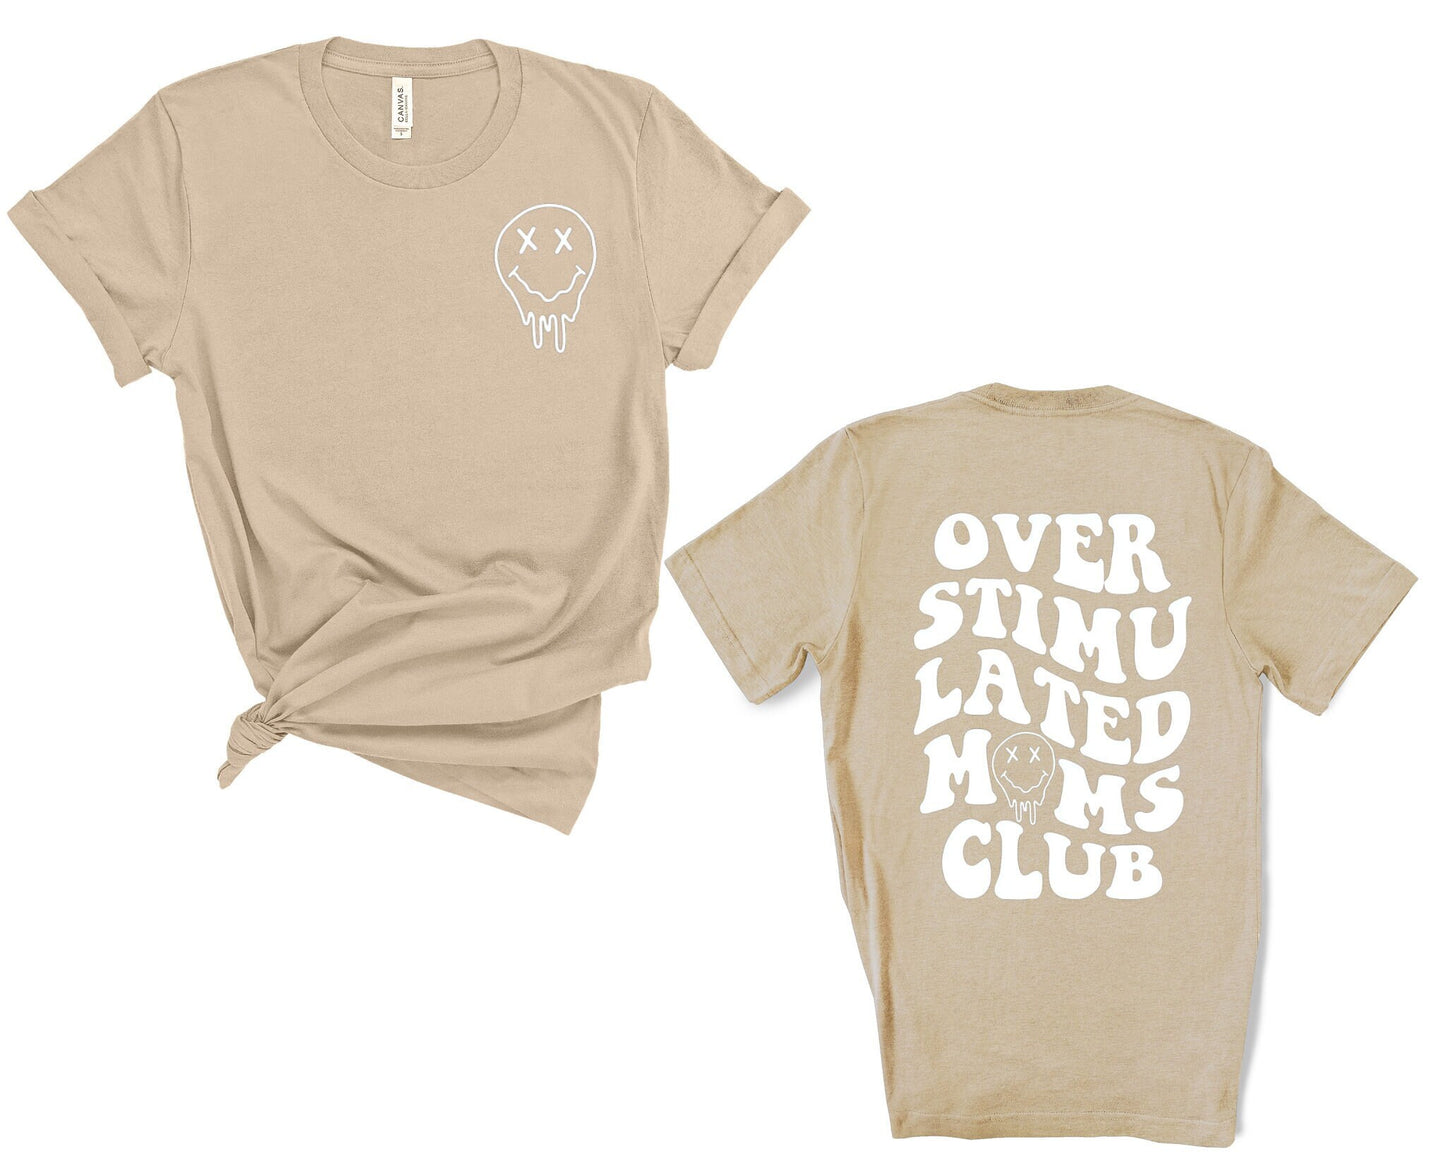 Overstimulated Moms Club Shirt, Mama Shirts, Trendy Mom Shirts, Mother’s Day Gift, Gift for Mom, Retro Mom Shirt